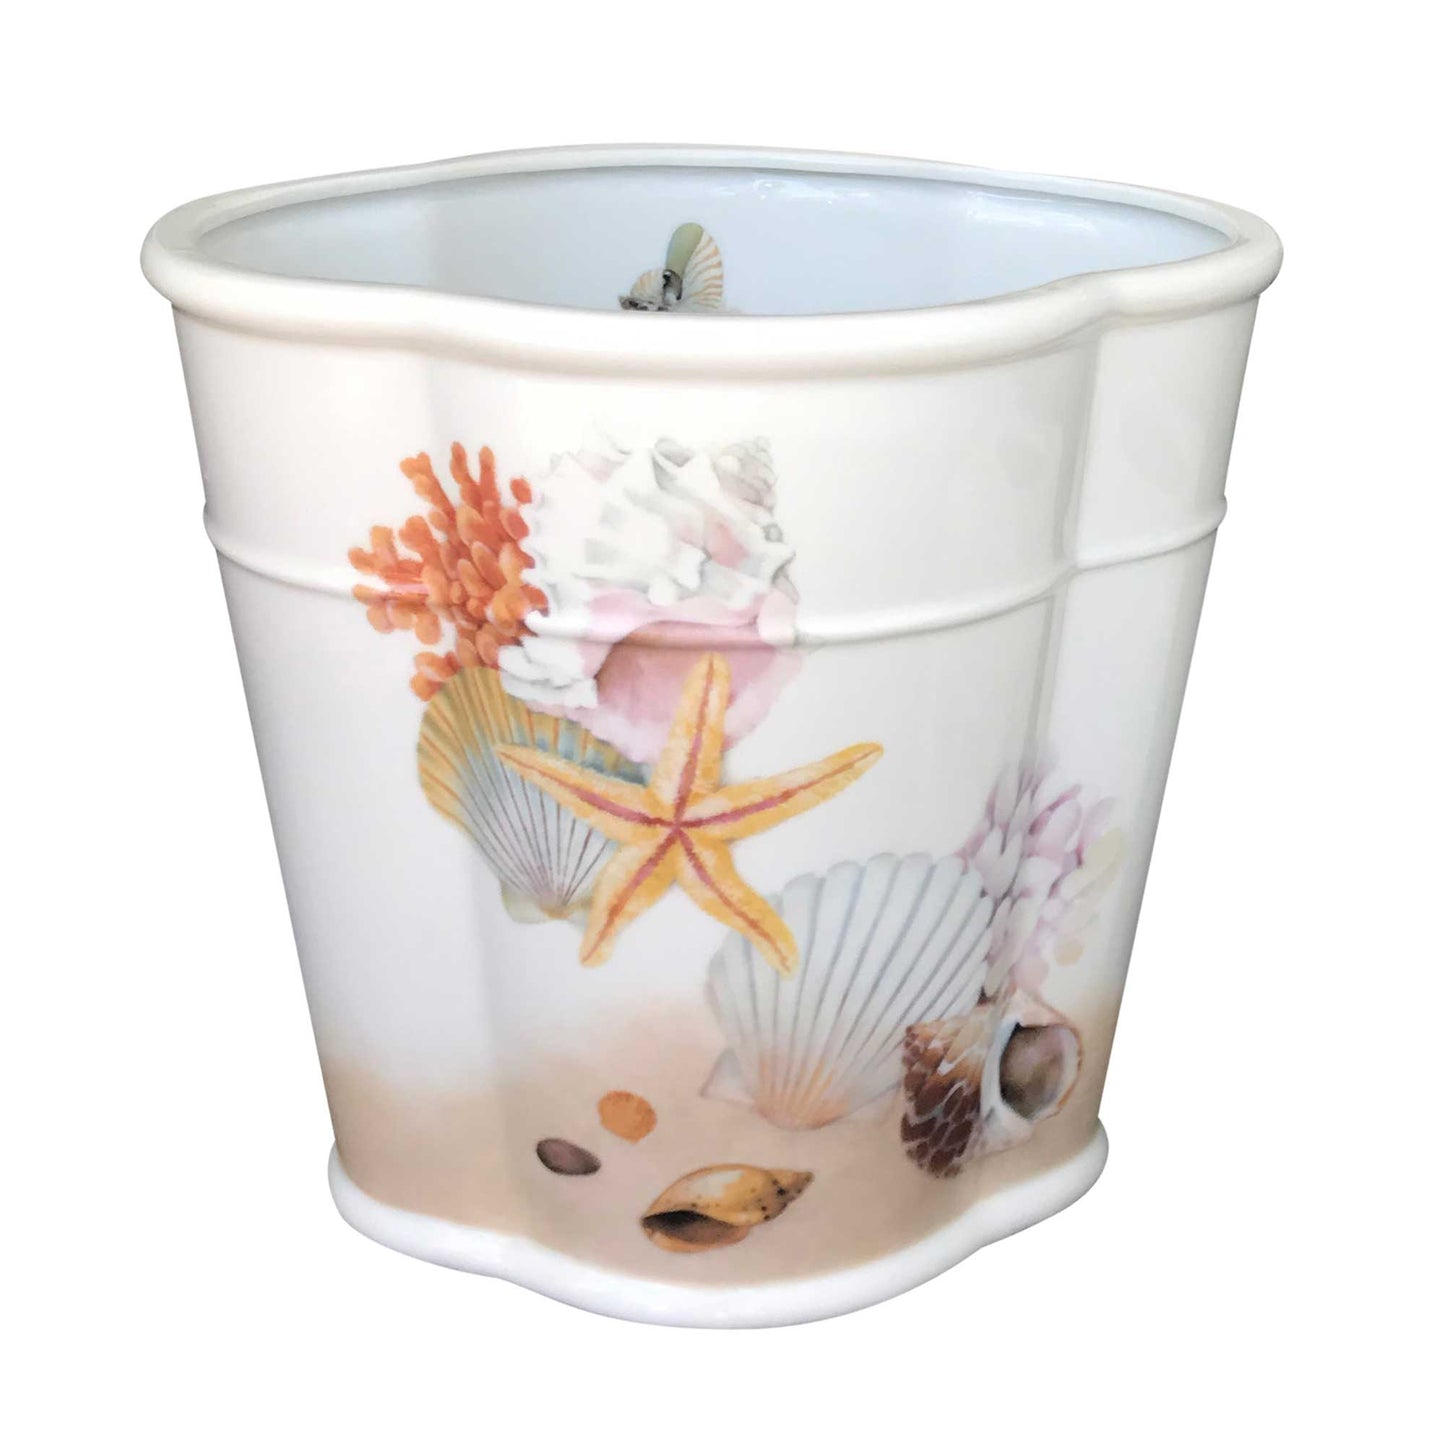 white ceramic waste basket painted with shells and starfish